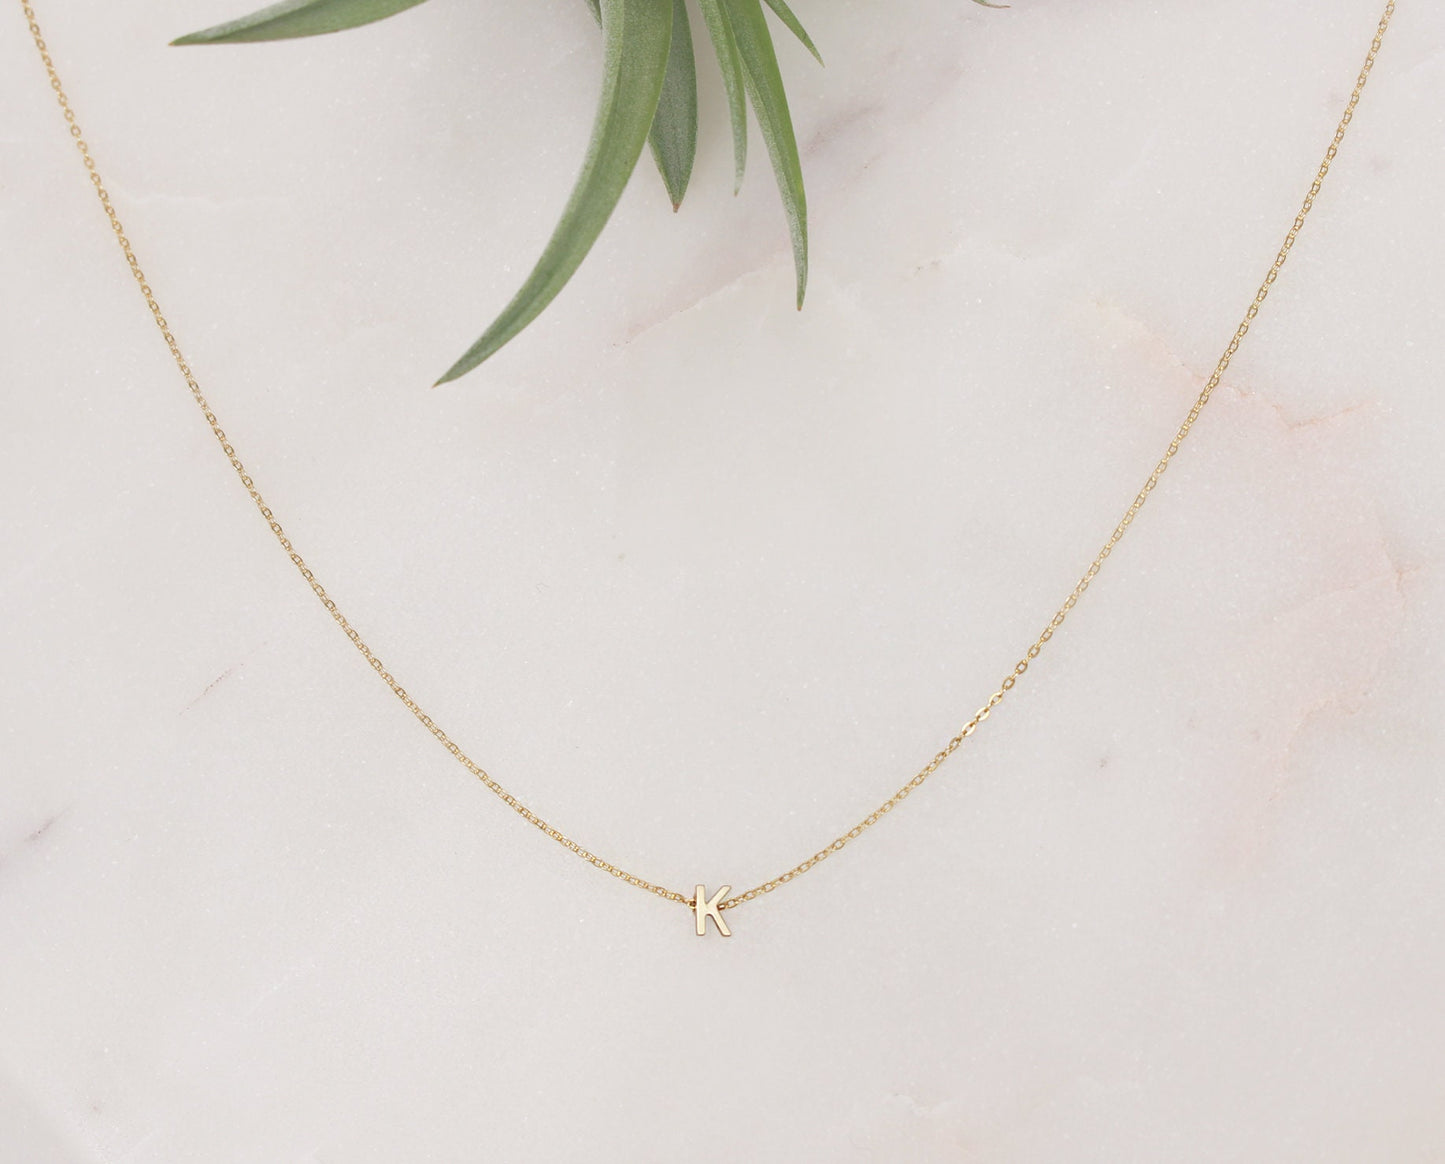 Gold Initial Block Necklace(Small) - 14k Solid Gold 4.8mm Alphabet Block, 14k Gold Filled Chain